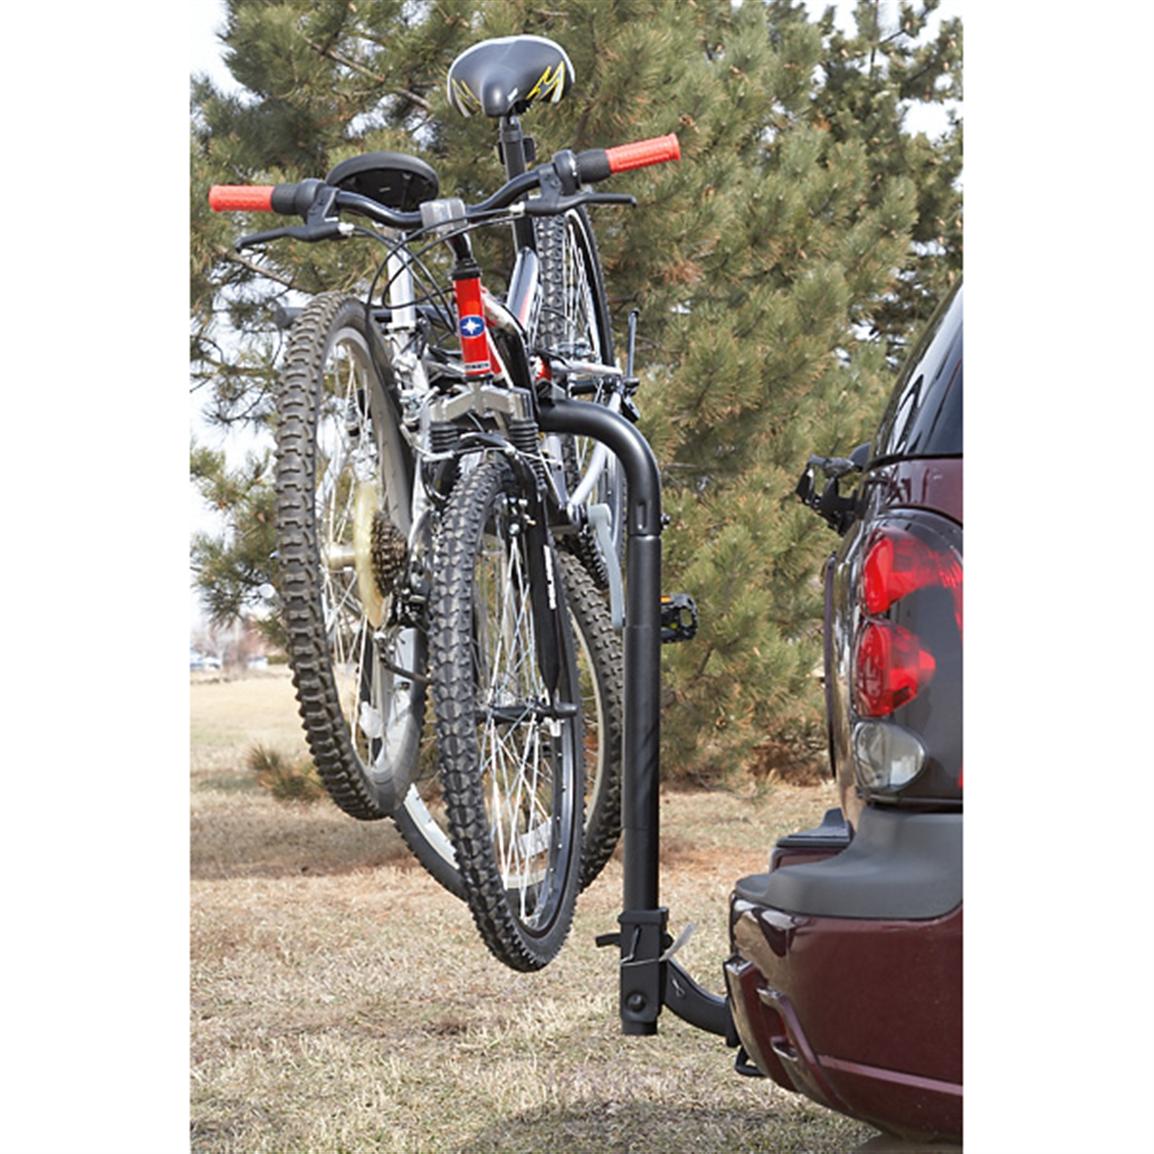 Double Fold down Bike Rack 138862, Roof Racks & Carriers at Sportsman's Guide